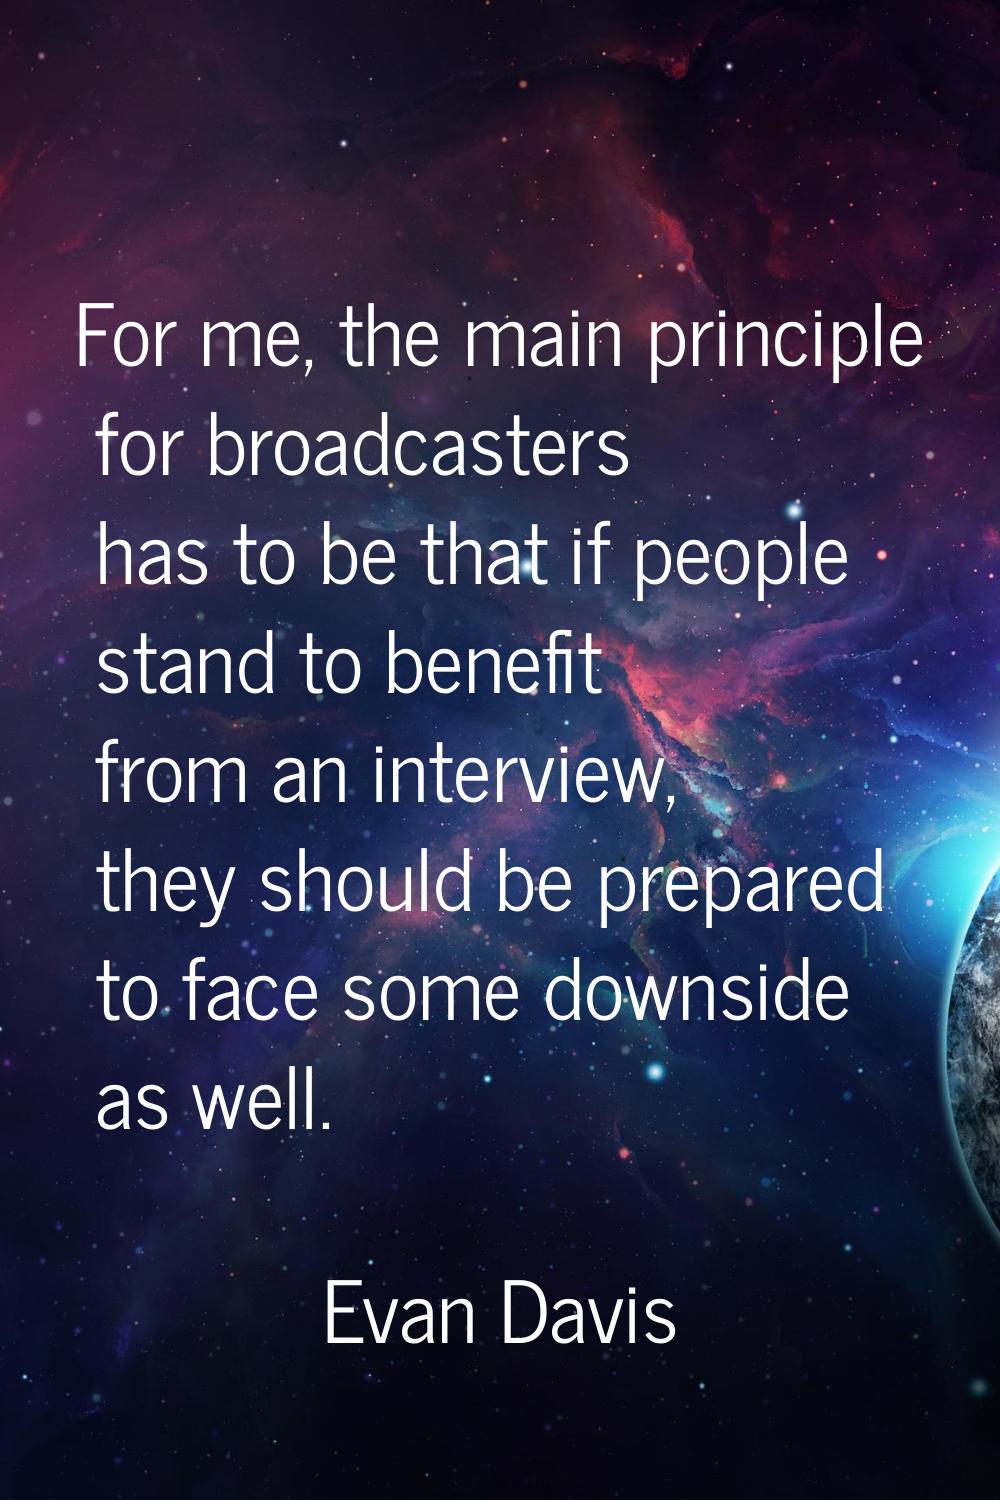 For me, the main principle for broadcasters has to be that if people stand to benefit from an inter